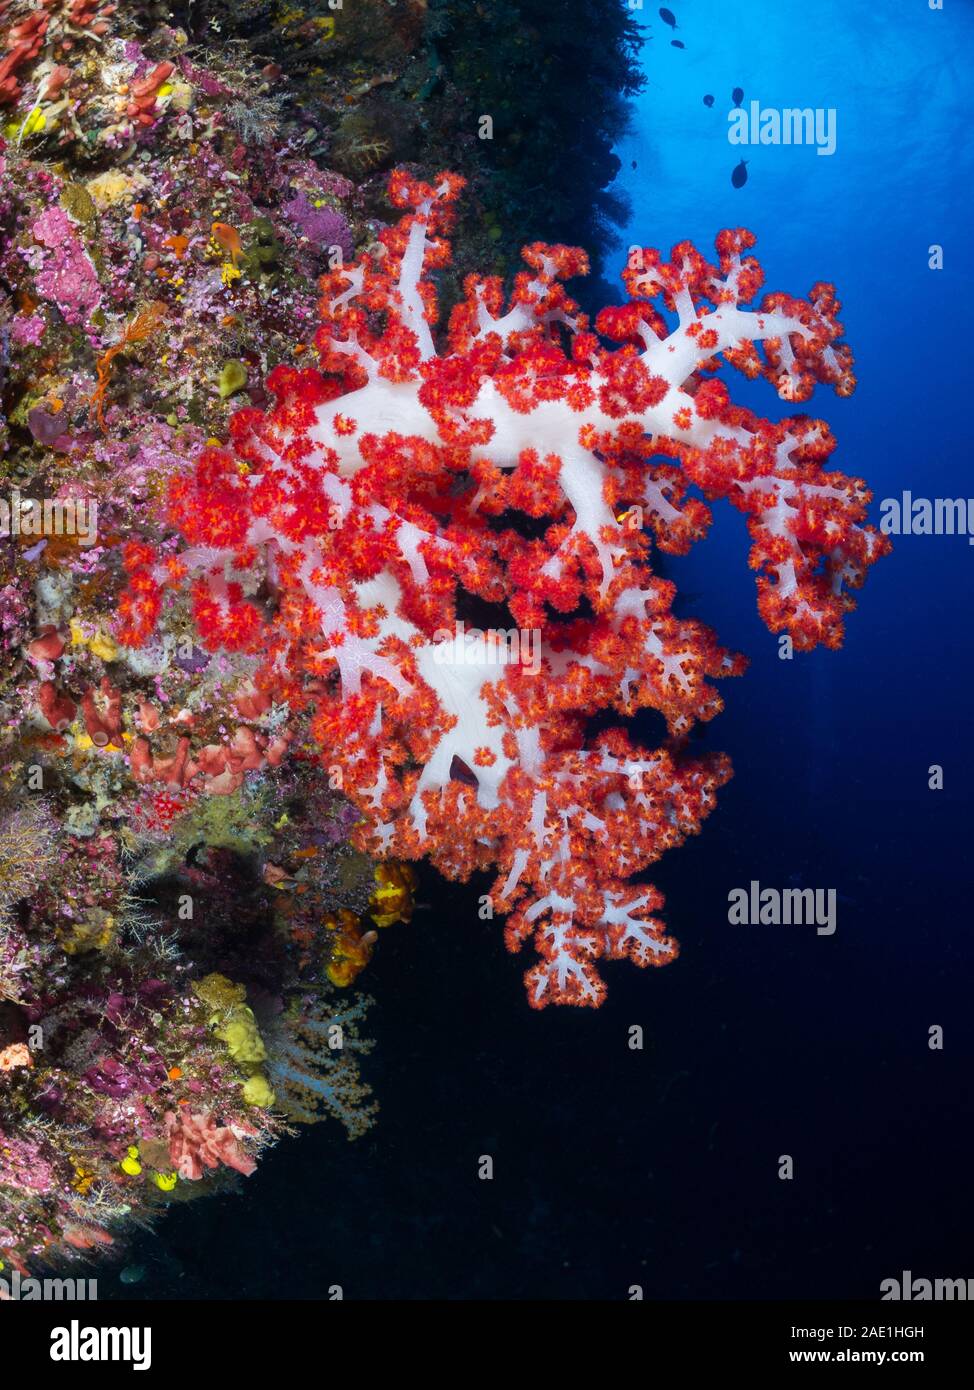 Coral Tree, Dendronephthya sp, Mabul, Malaisie Banque D'Images